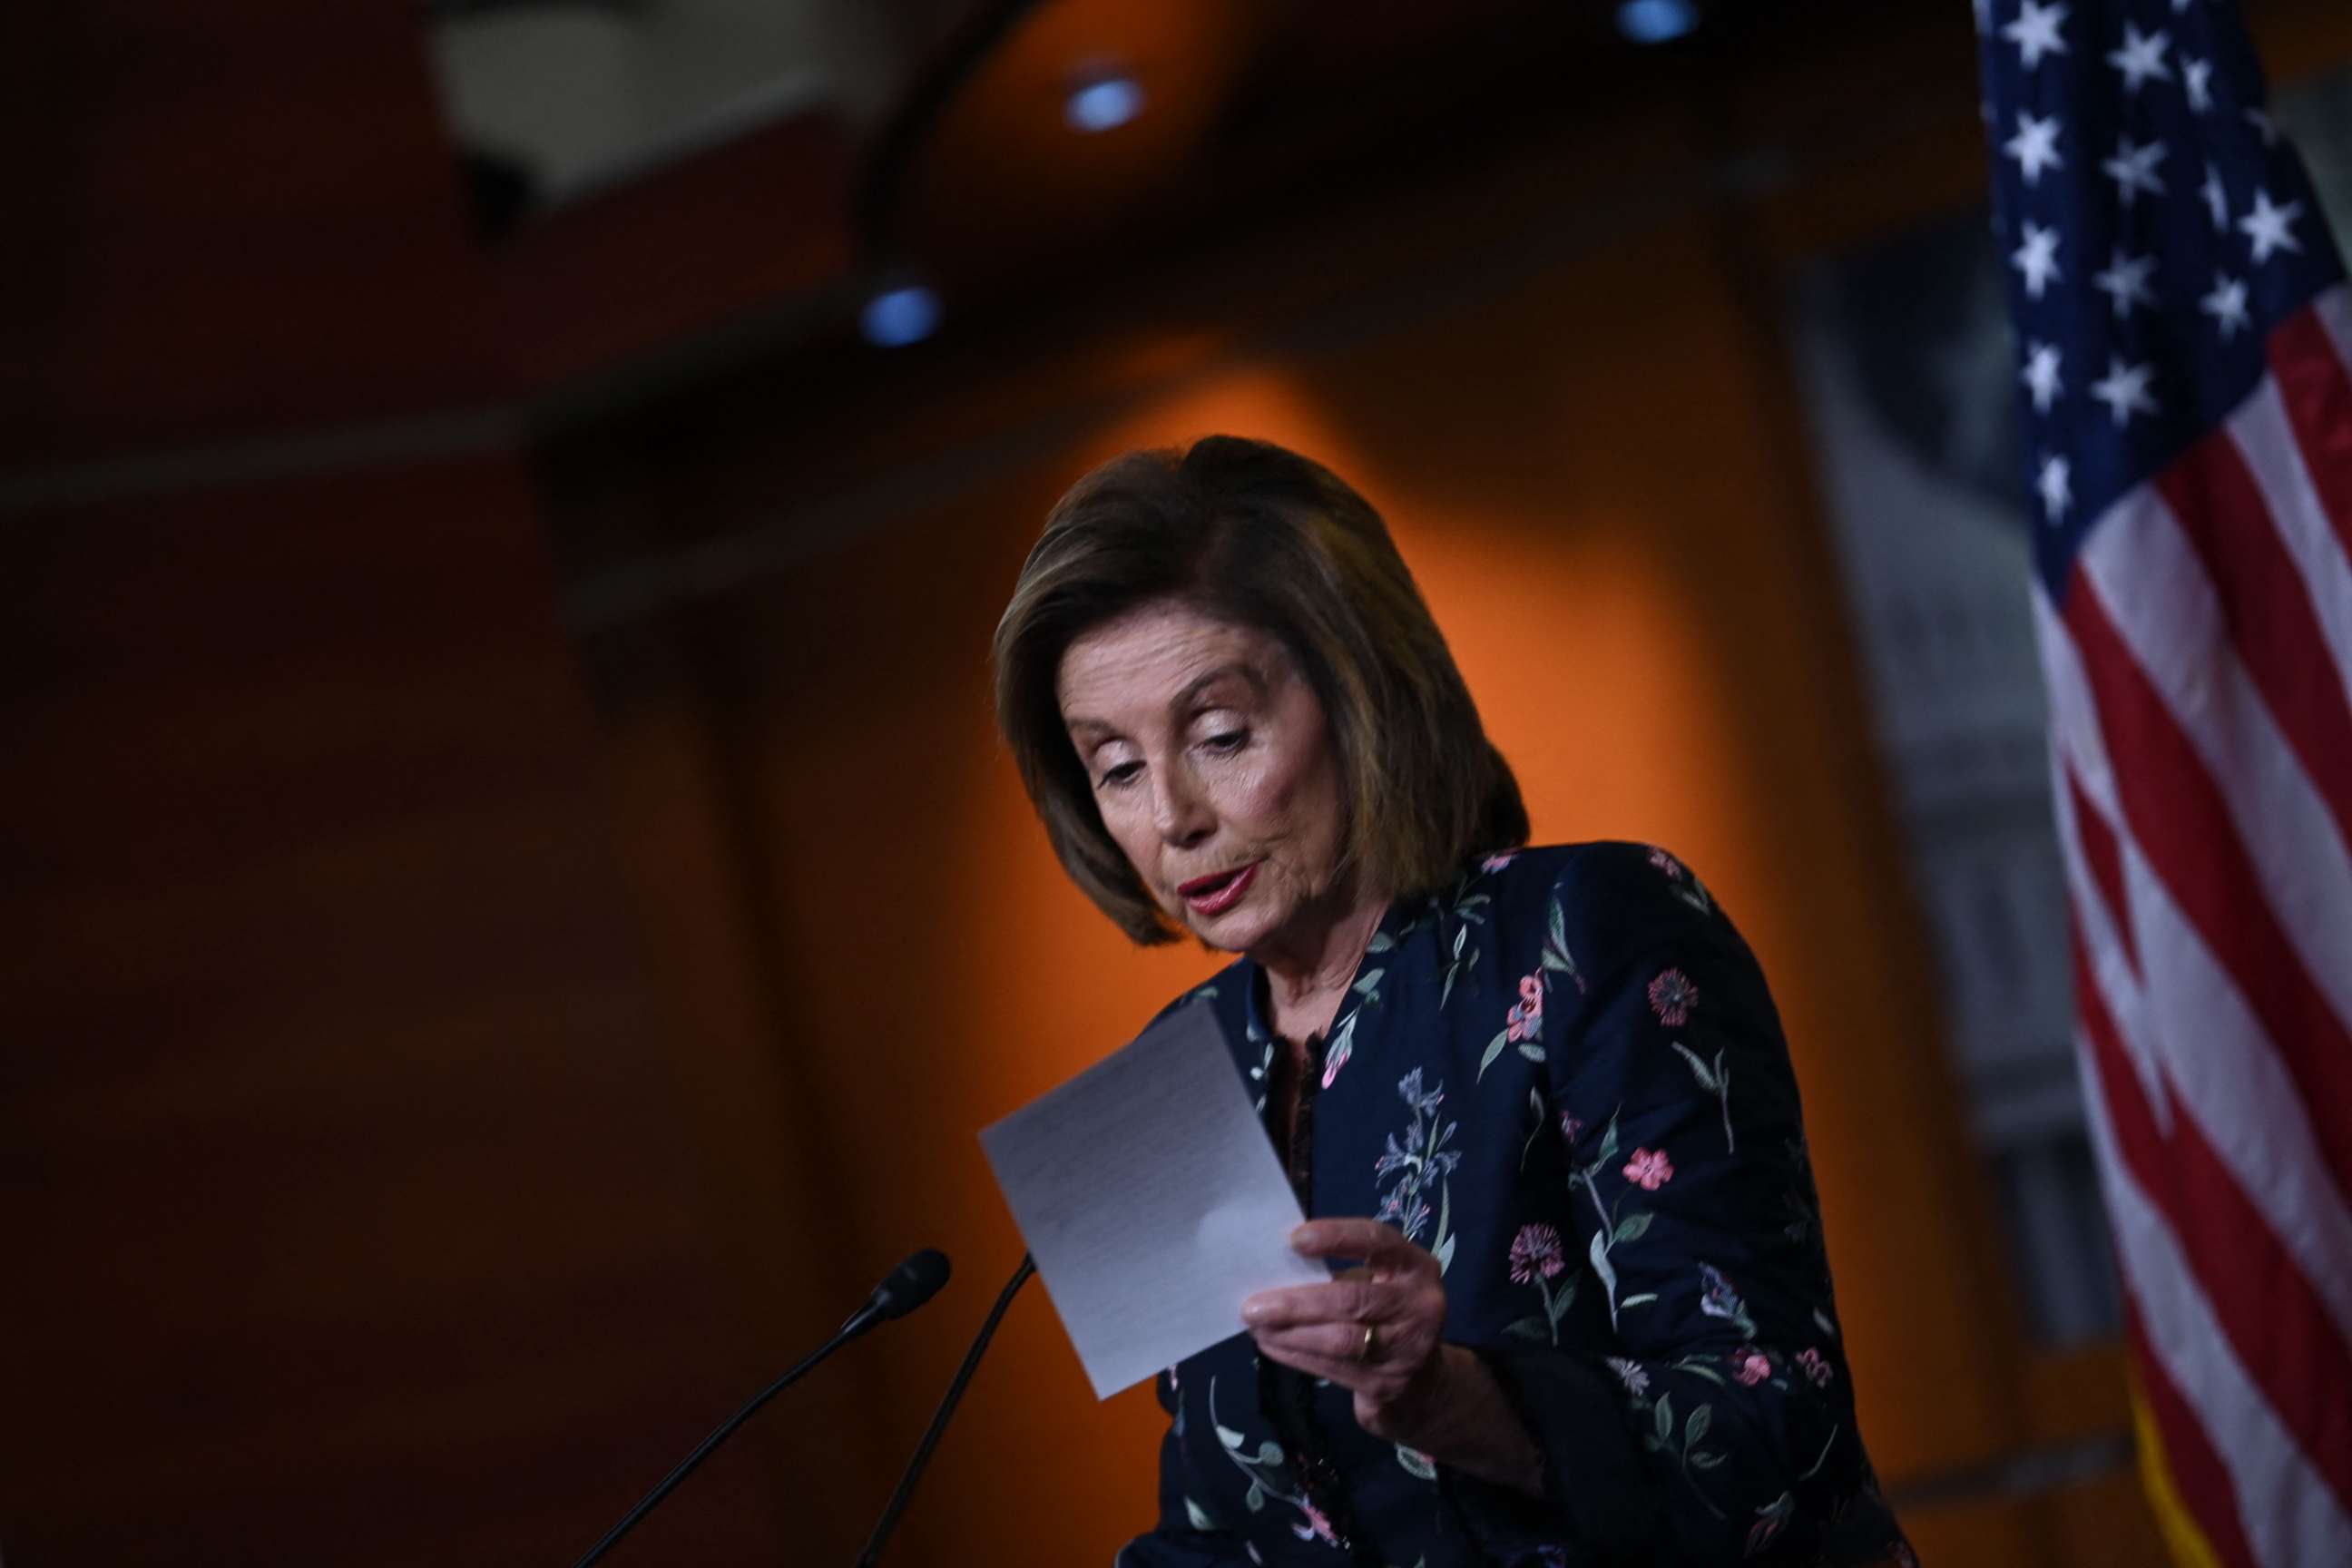 PHOTO: Speaker of the House, Nancy Pelosi, Democrat of California, speaks at her weekly press briefing on Capitol Hill in Washington, DC, July 22, 2021.